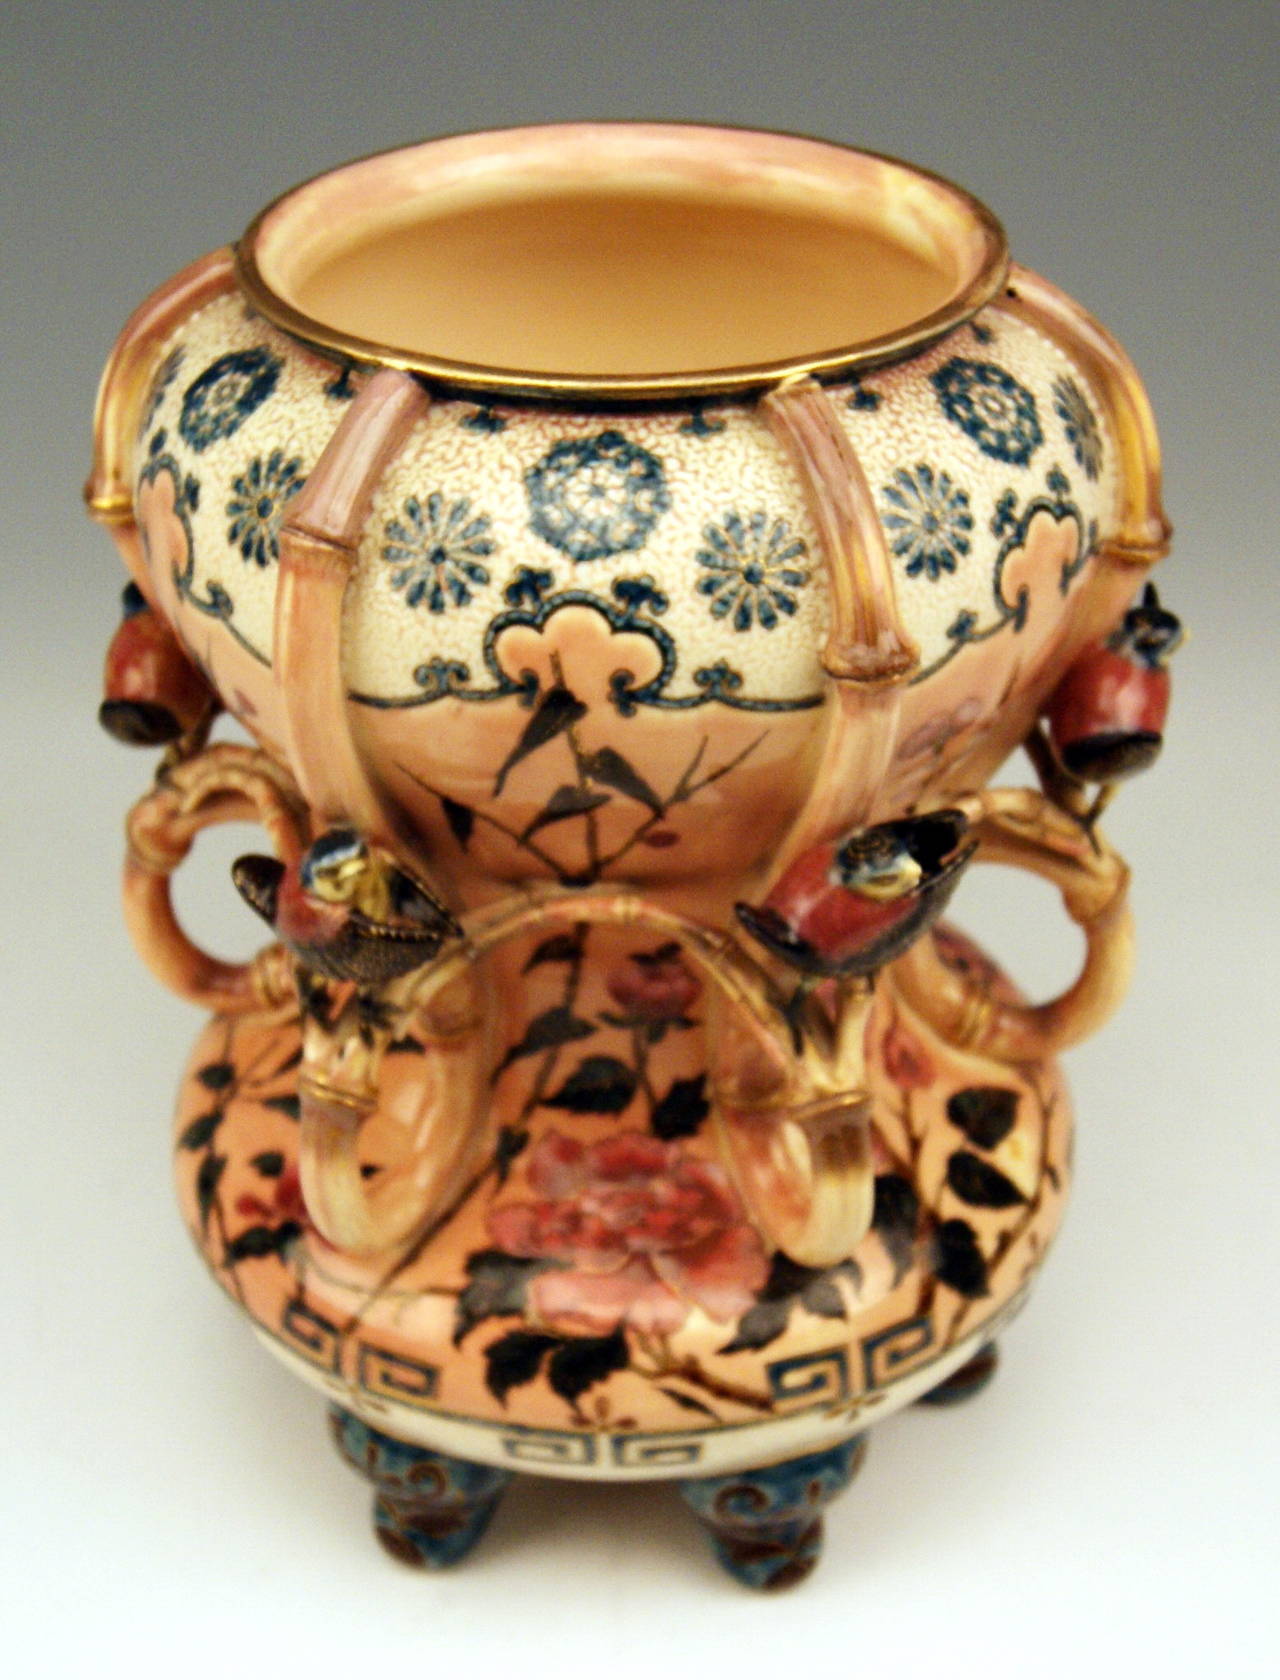 Hungarian Zsolnay Vintage and Rare Vase with Birds Abundantly Decorated, circa 1882-1885